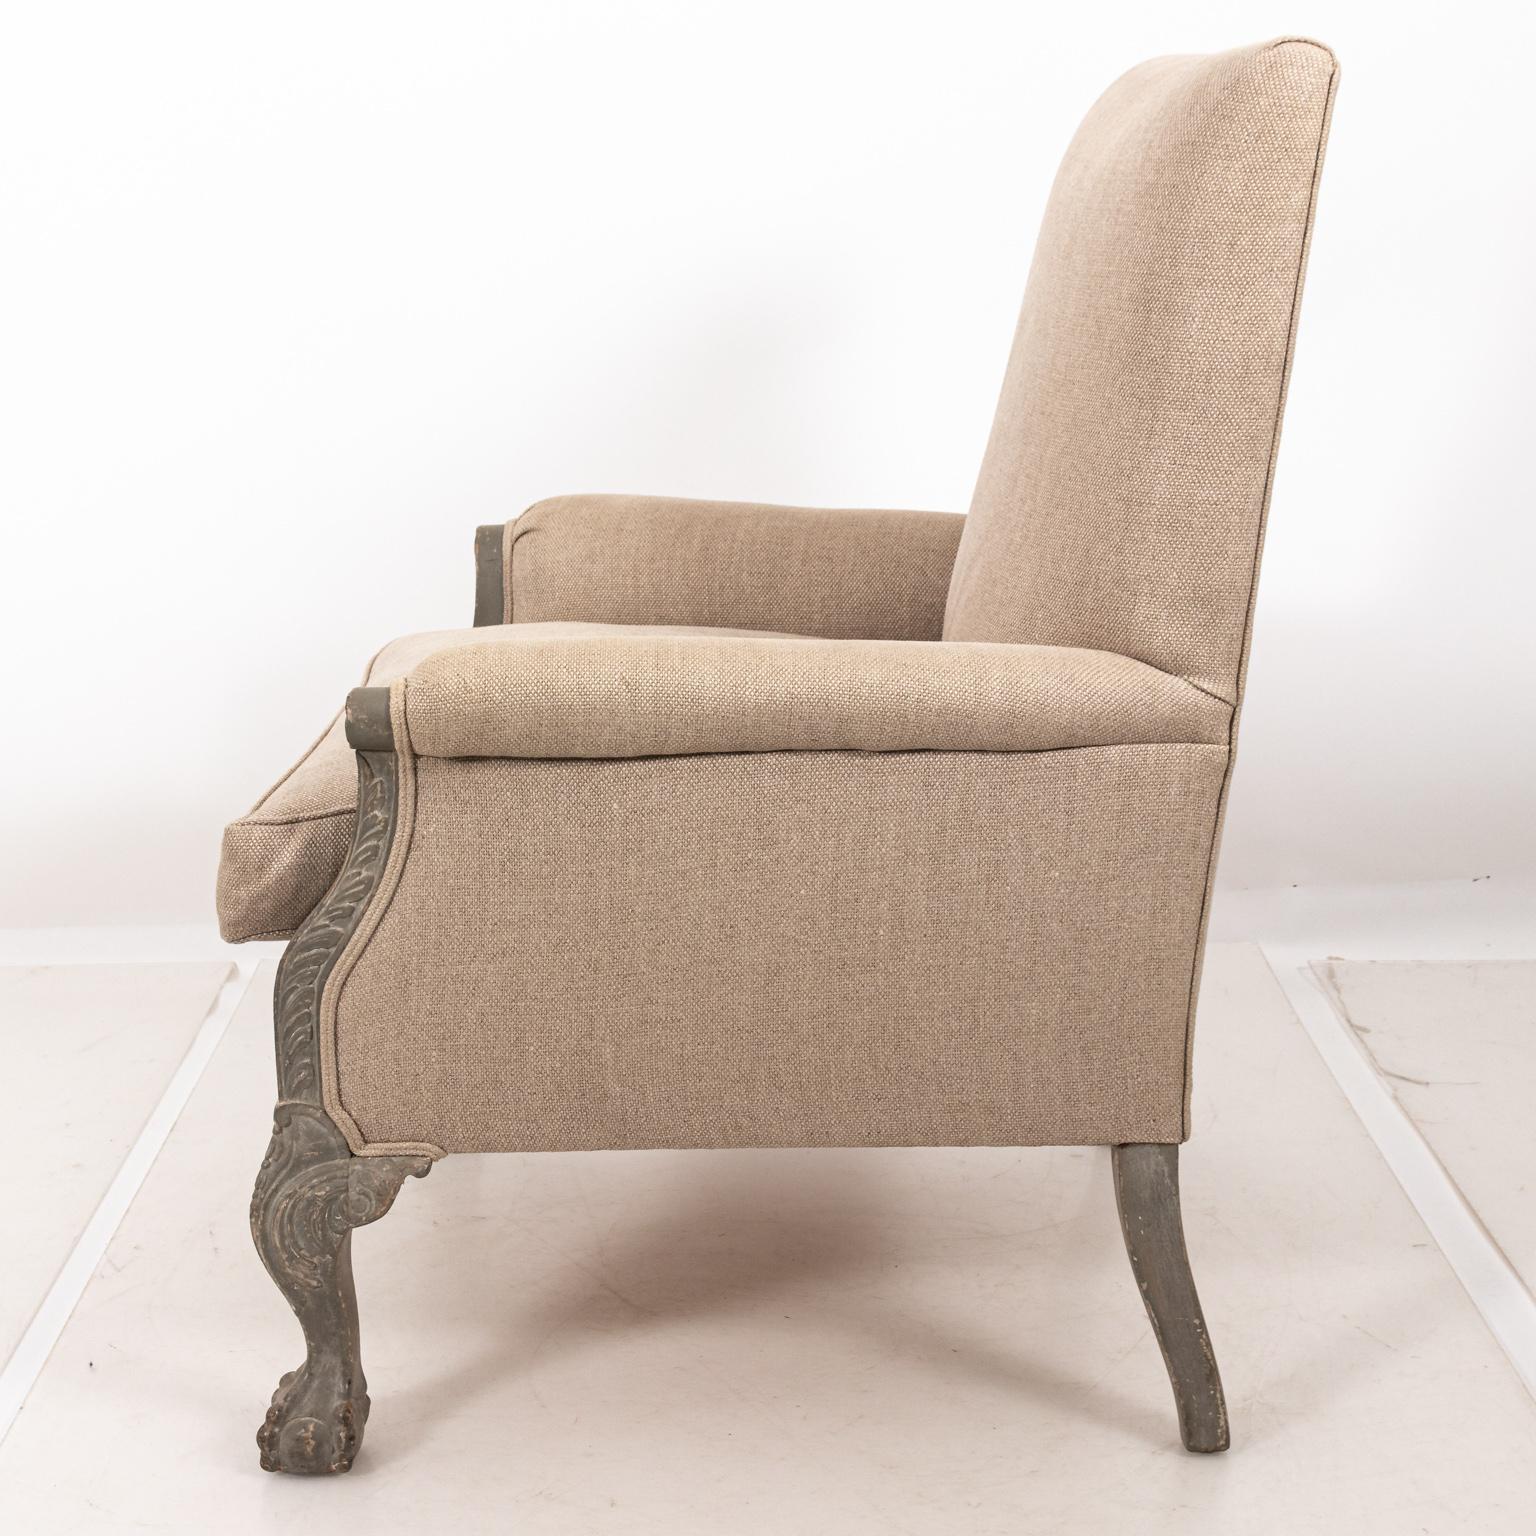 Fully upholstered Victorian lounge armchair with gray painted frame and ball and claw feet, circa 1850s. The piece also features sand colored Belgian Linen. Please note of wear consistent with age including distressed finish.